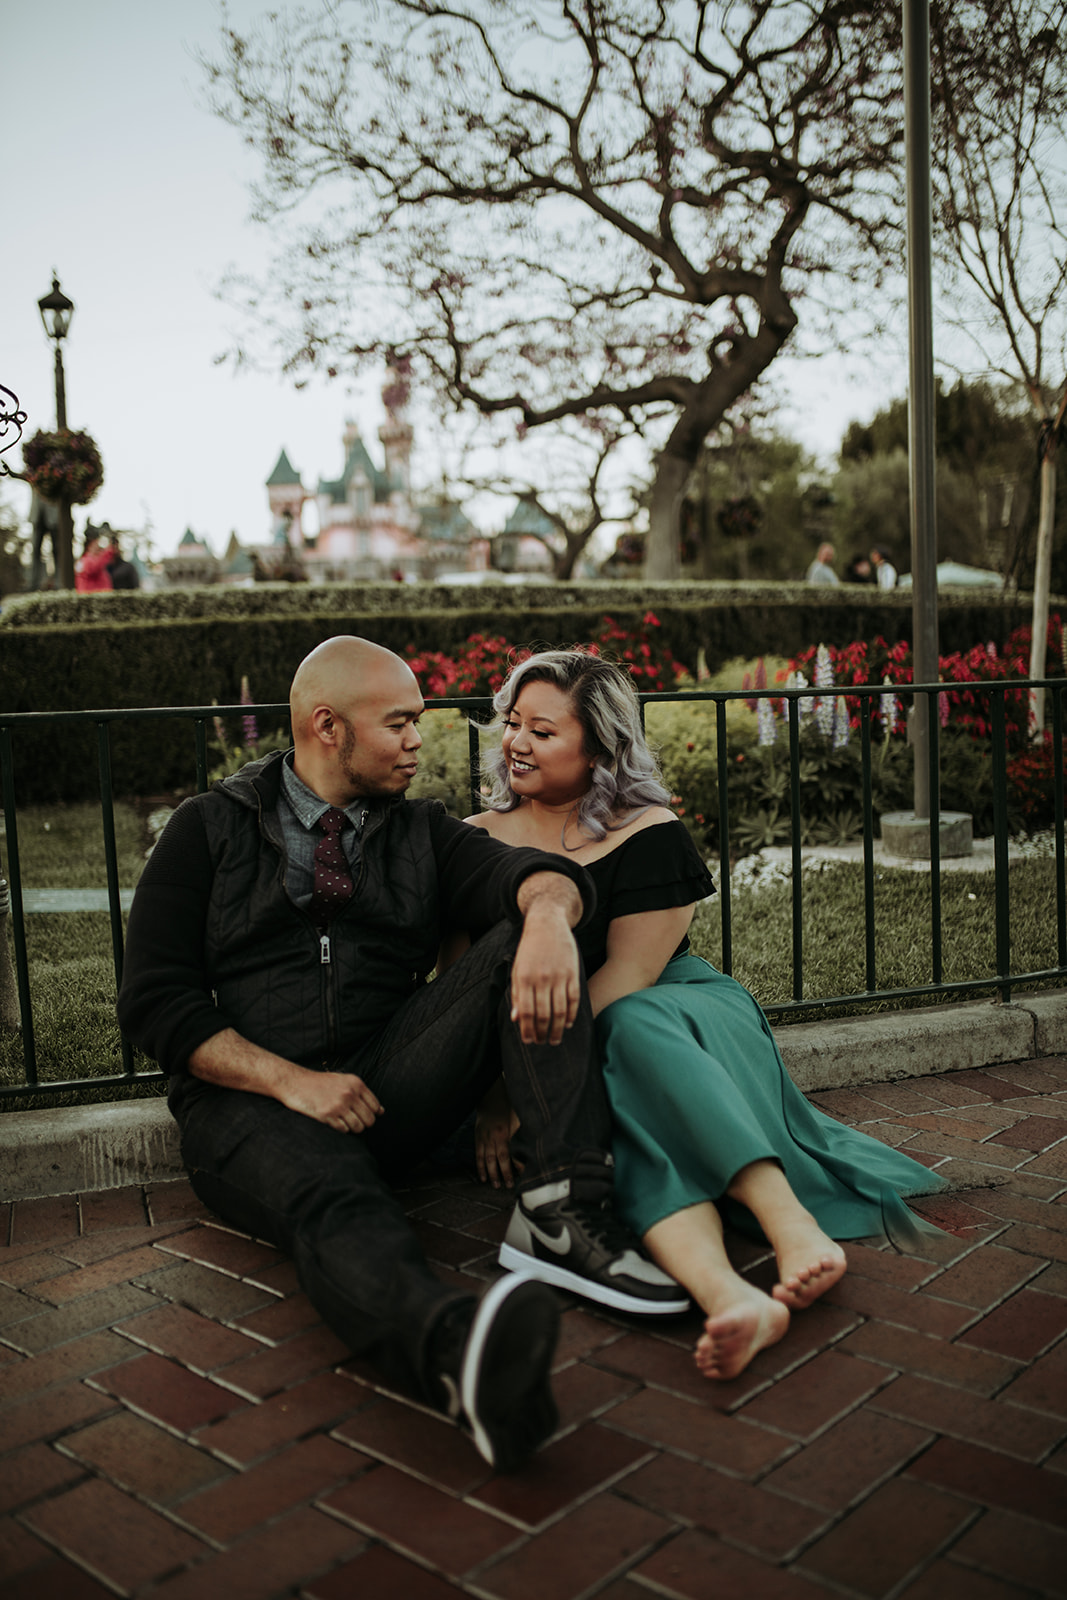 After hours of walking around Disneyland and California Adventure, we needed a break and found a nice little patch of brick to sit on.